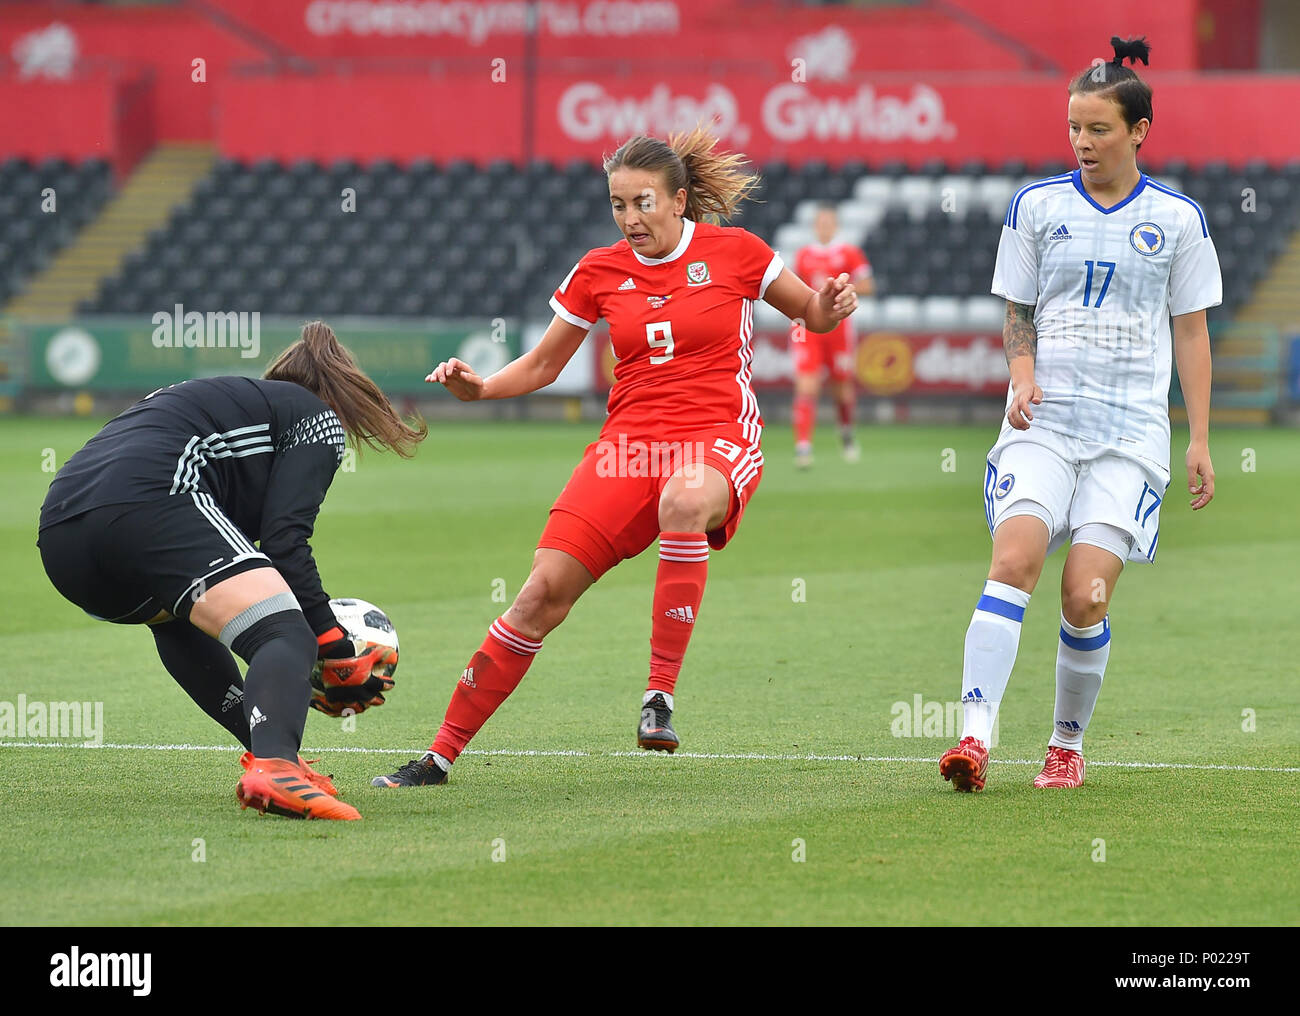 Wales v Bosnia in action during the Women's World Cup Qualifiers at Liberty Stadium Swansea Swansea Wales on June 07 2018 Graham / GlennSports Stock Photo